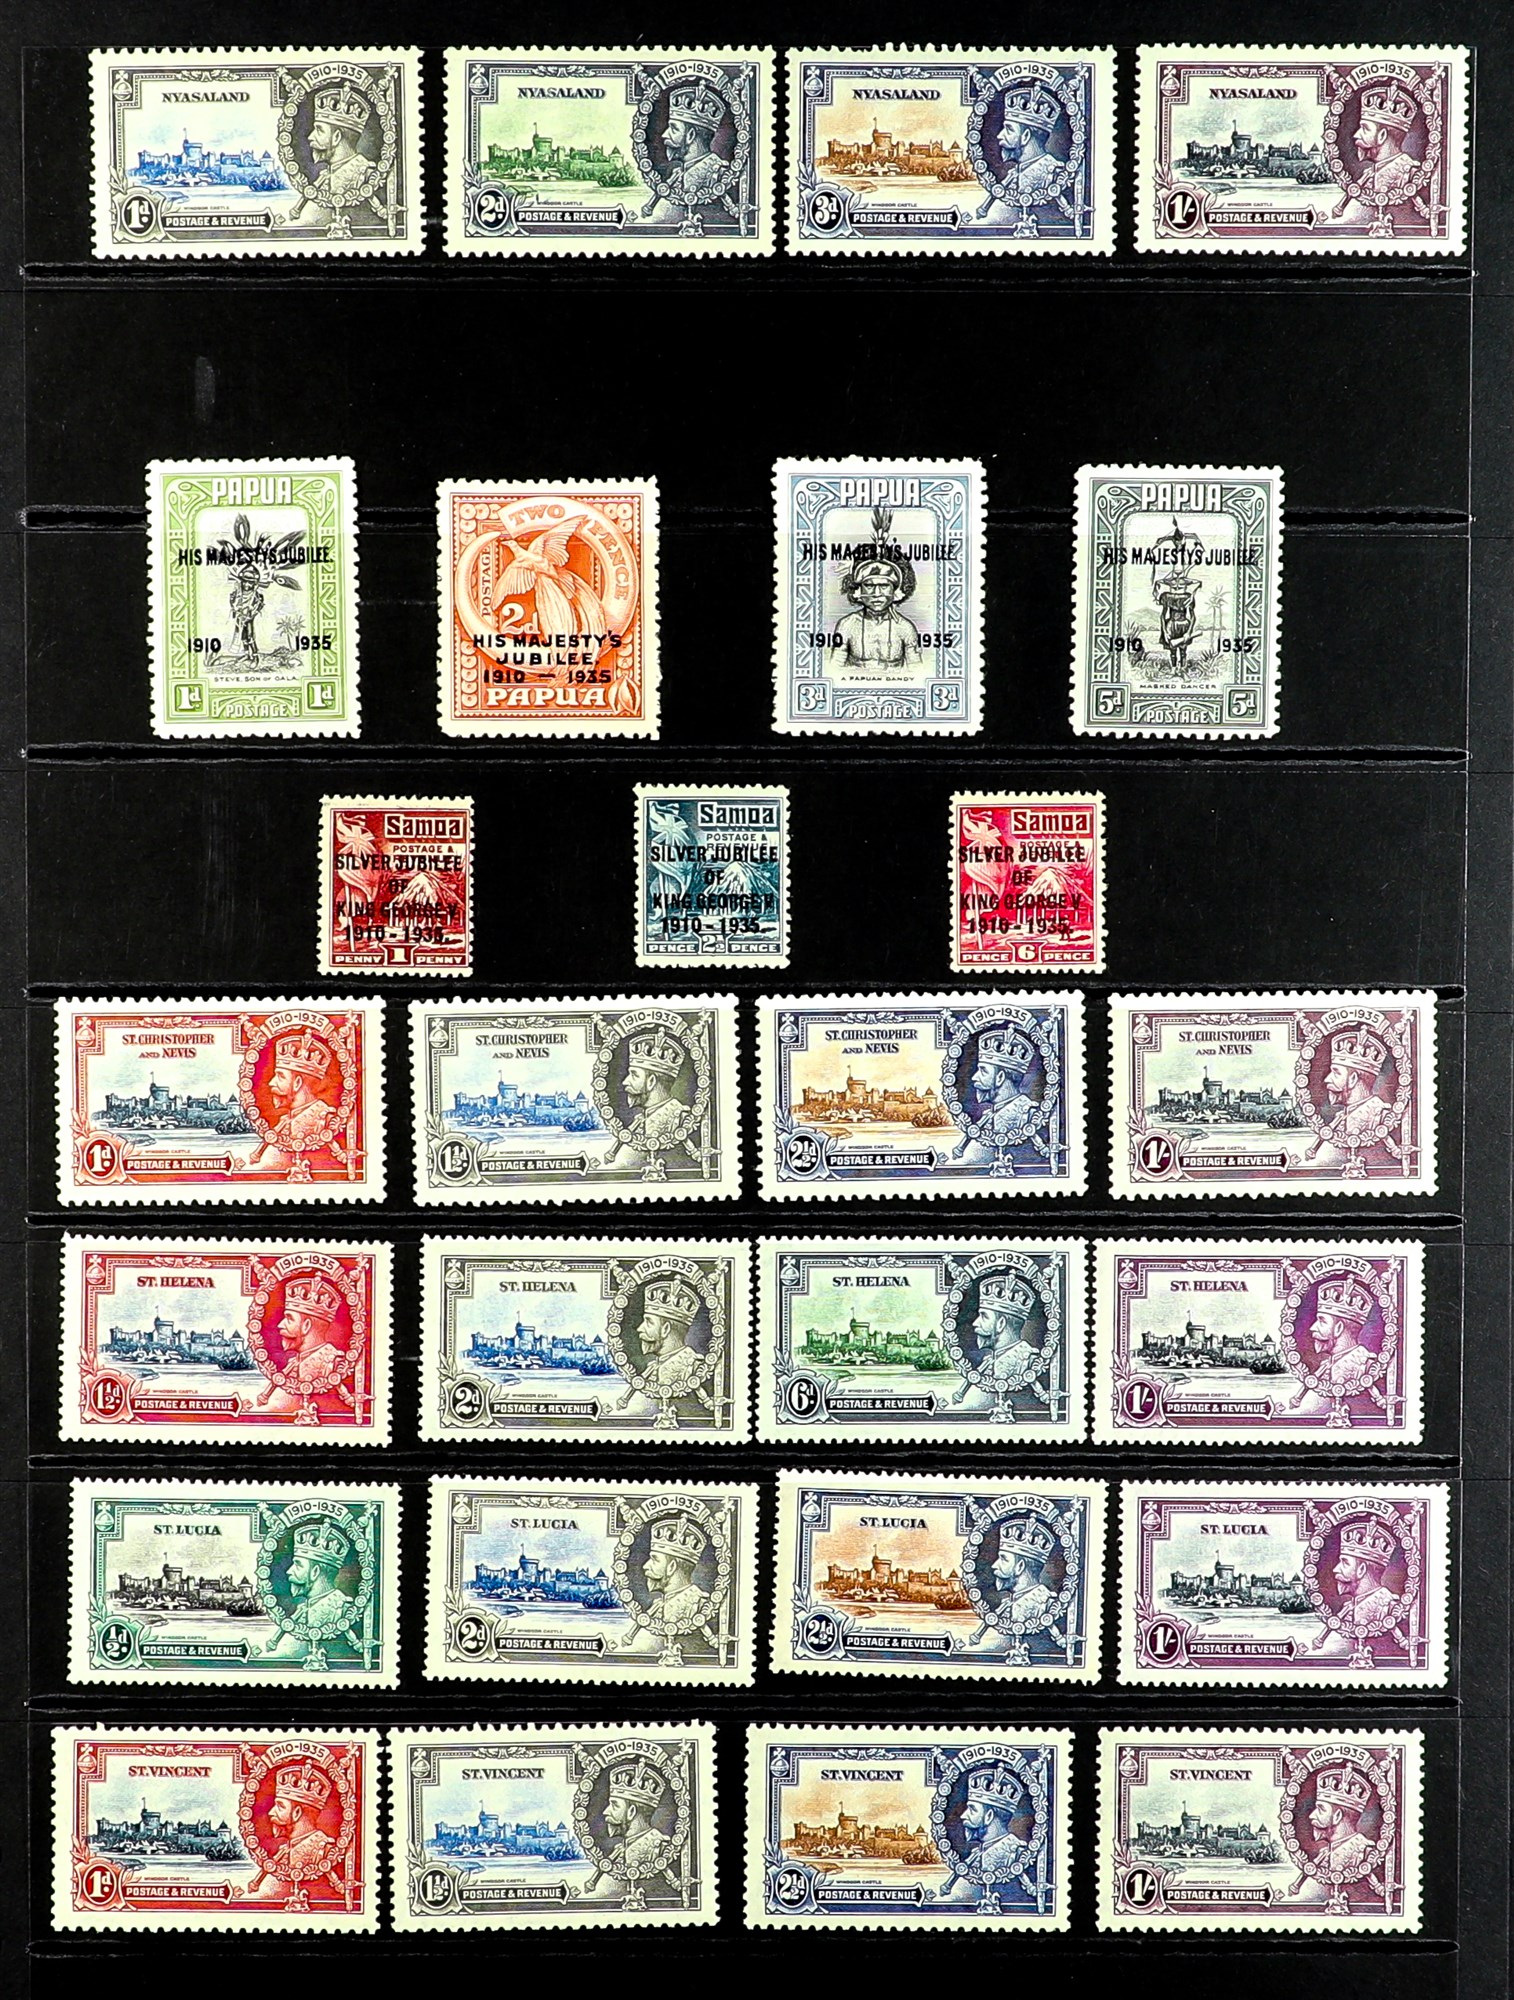 COLLECTIONS & ACCUMULATIONS 1935 SILVER JUBILEE complete Commonwealth omnibus series (no Egypt), - Image 7 of 9